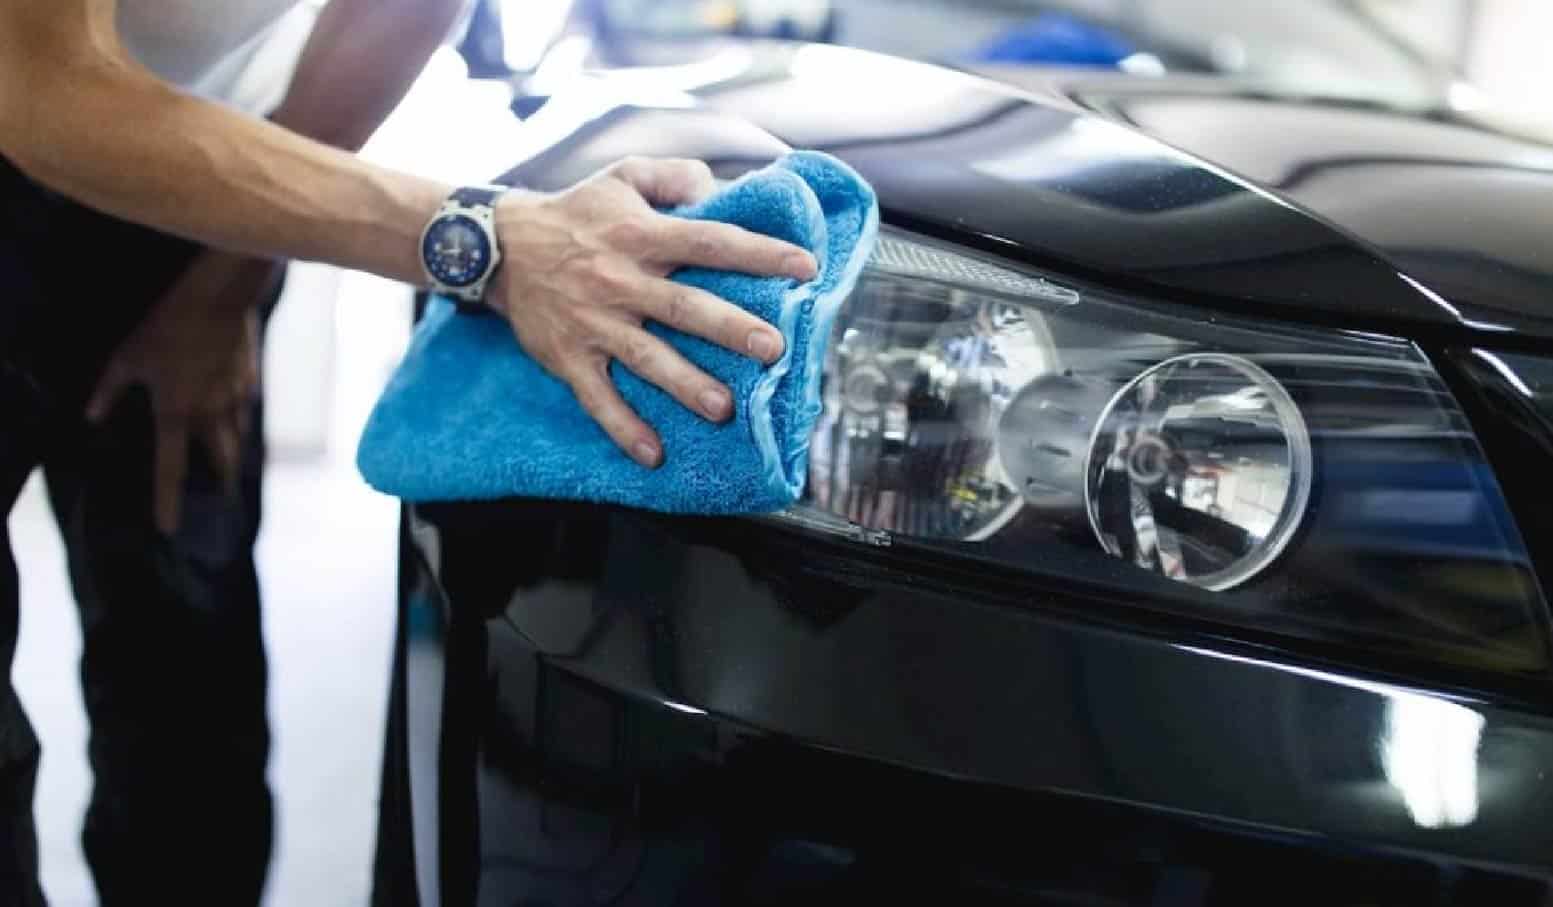 How to restore headlights at home professionally|headlight restoration|How to Restore Headlight Lenses|Headlight restoration step 1|Headlight restoration step 2|Headlight restoration step 3|Headlight restoration step 4